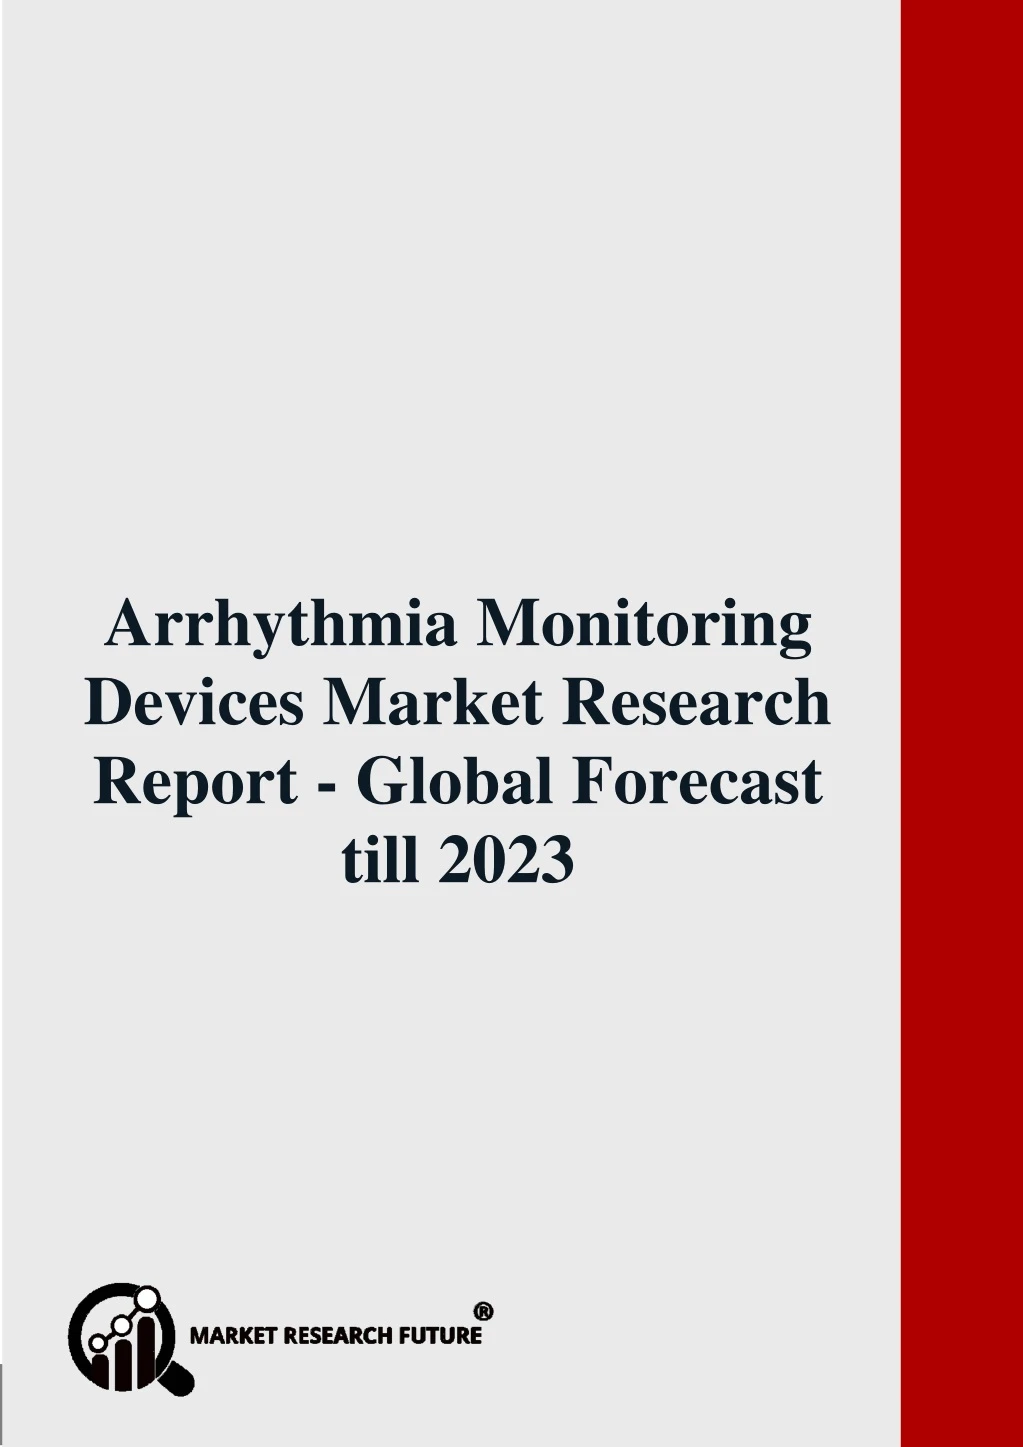 arrhythmia monitoring devices market research